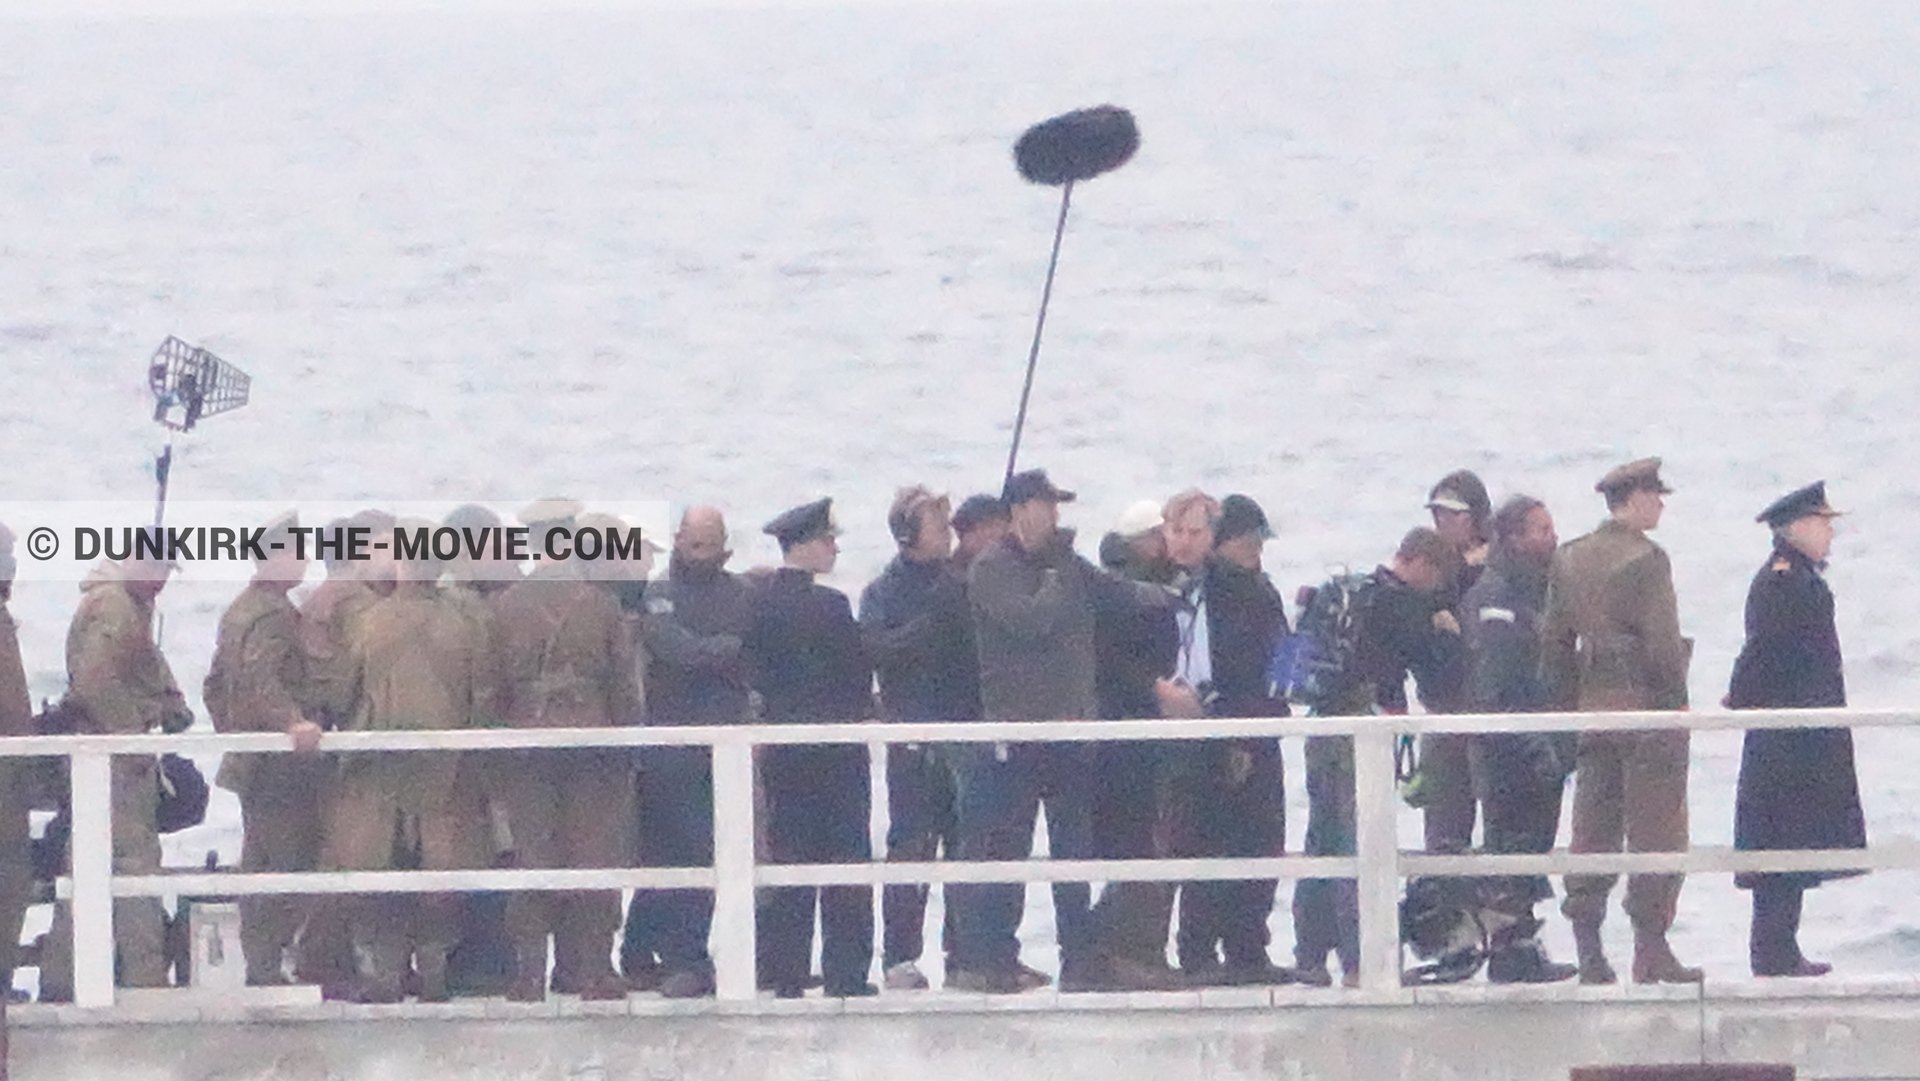 Picture with actor, IMAX camera, Hoyte van Hoytema, EST pier, Kenneth Branagh, Christopher Nolan, technical team,  from behind the scene of the Dunkirk movie by Nolan